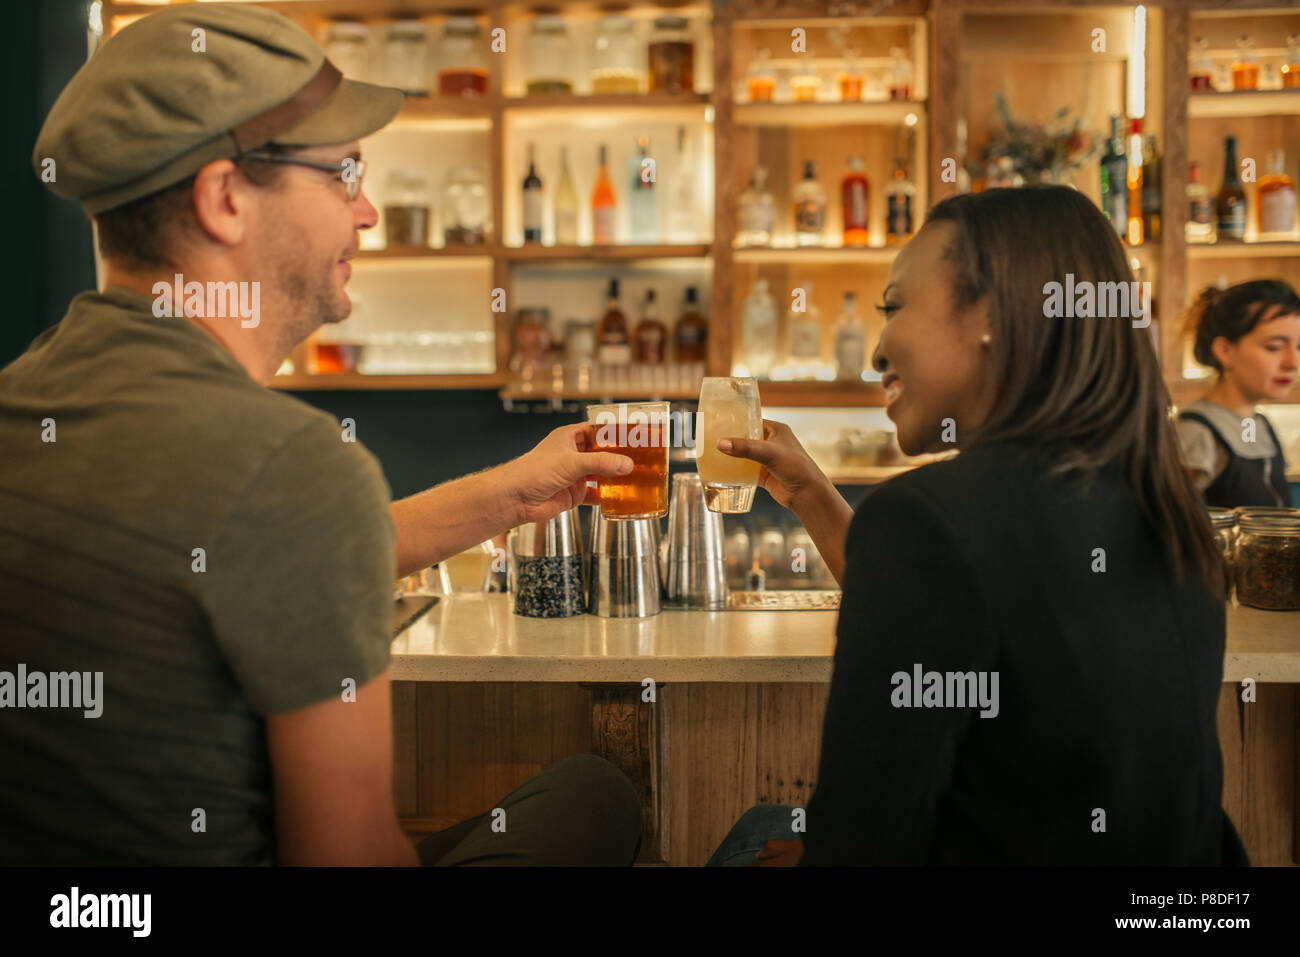 Two smiling friends sitting in a bar cheering with drinks Stock Photo